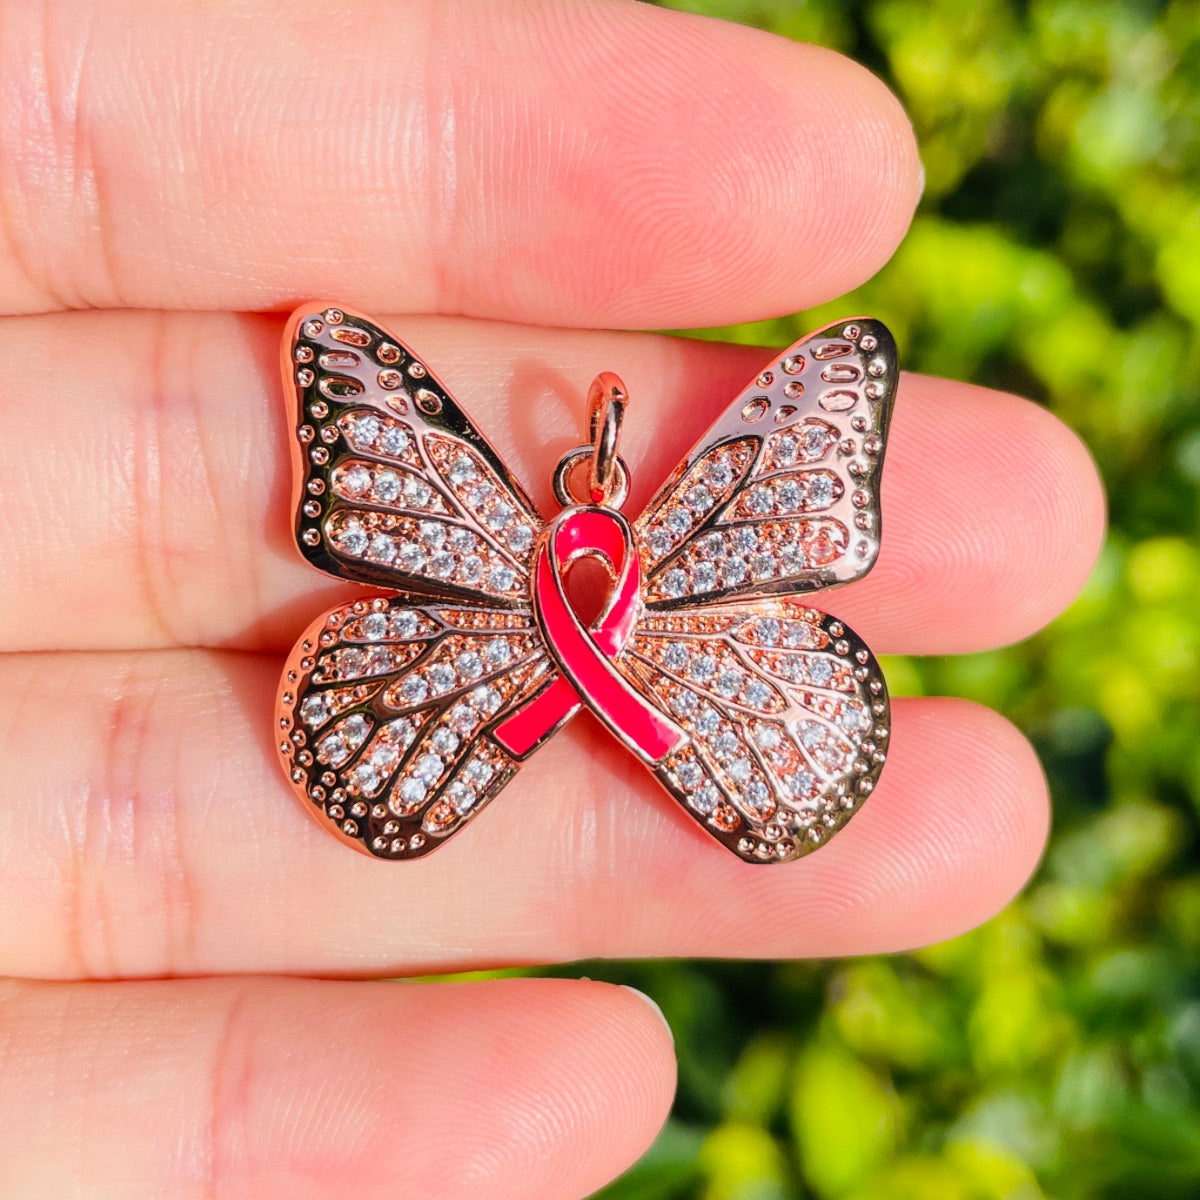 10pcs/lot CZ Pave Pink Ribbon Butterfly Charms - Breast Cancer Awareness Rose Gold CZ Paved Charms Breast Cancer Awareness Butterflies New Charms Arrivals Charms Beads Beyond